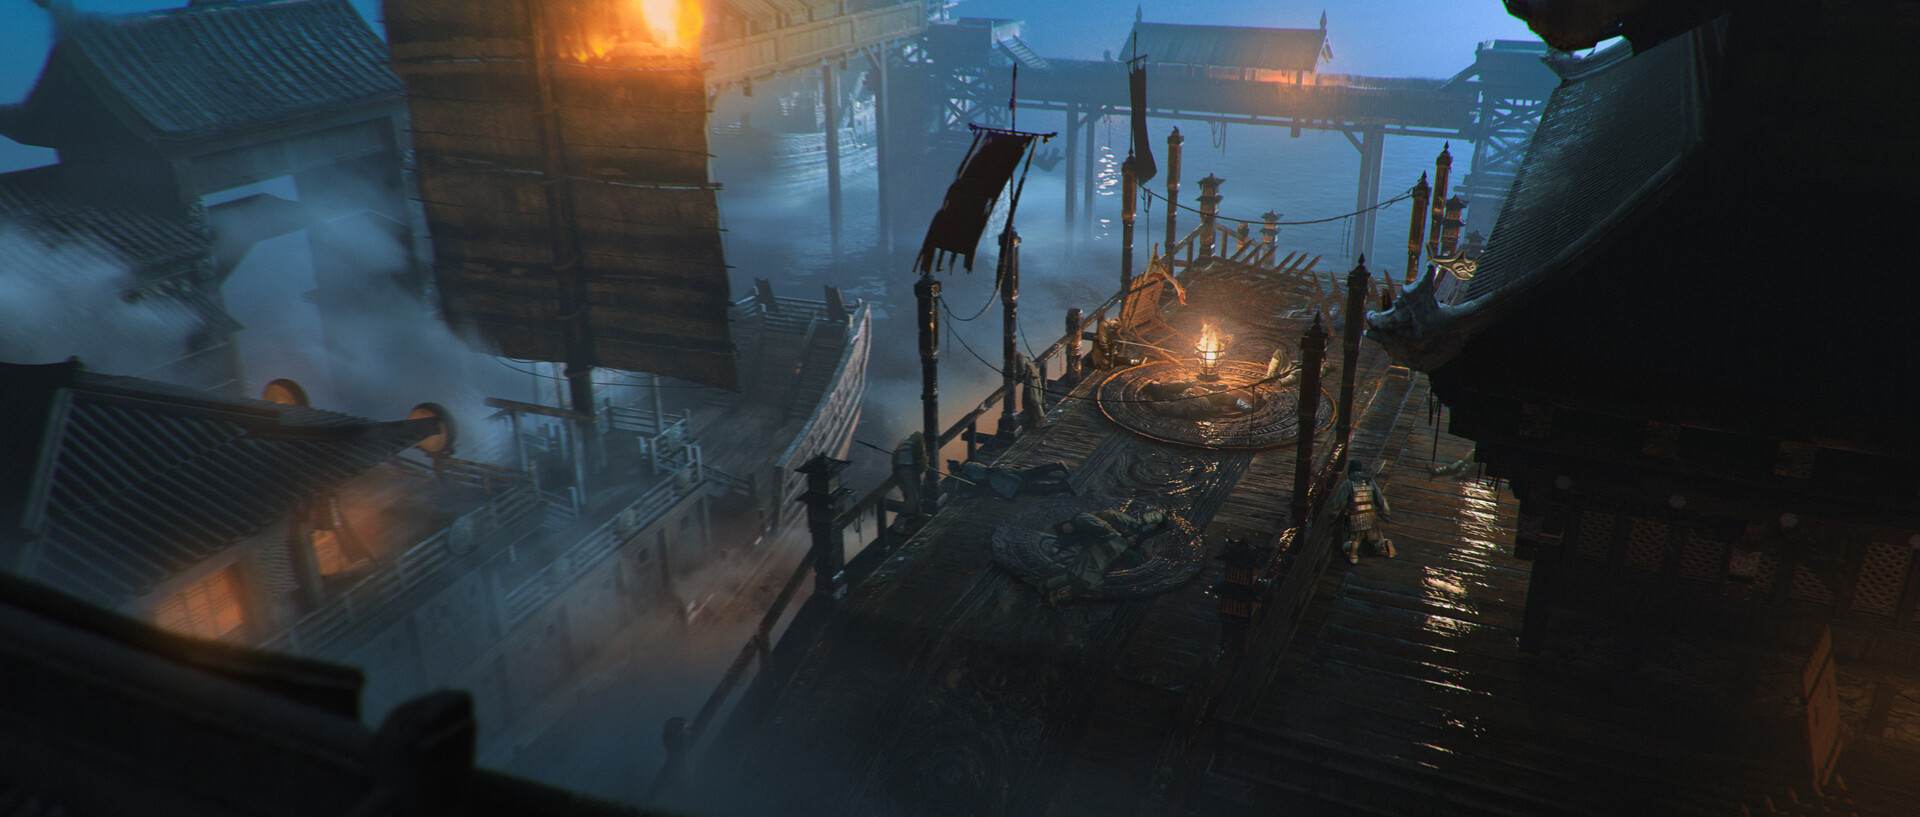 ArtStation - Military stronghold on the river